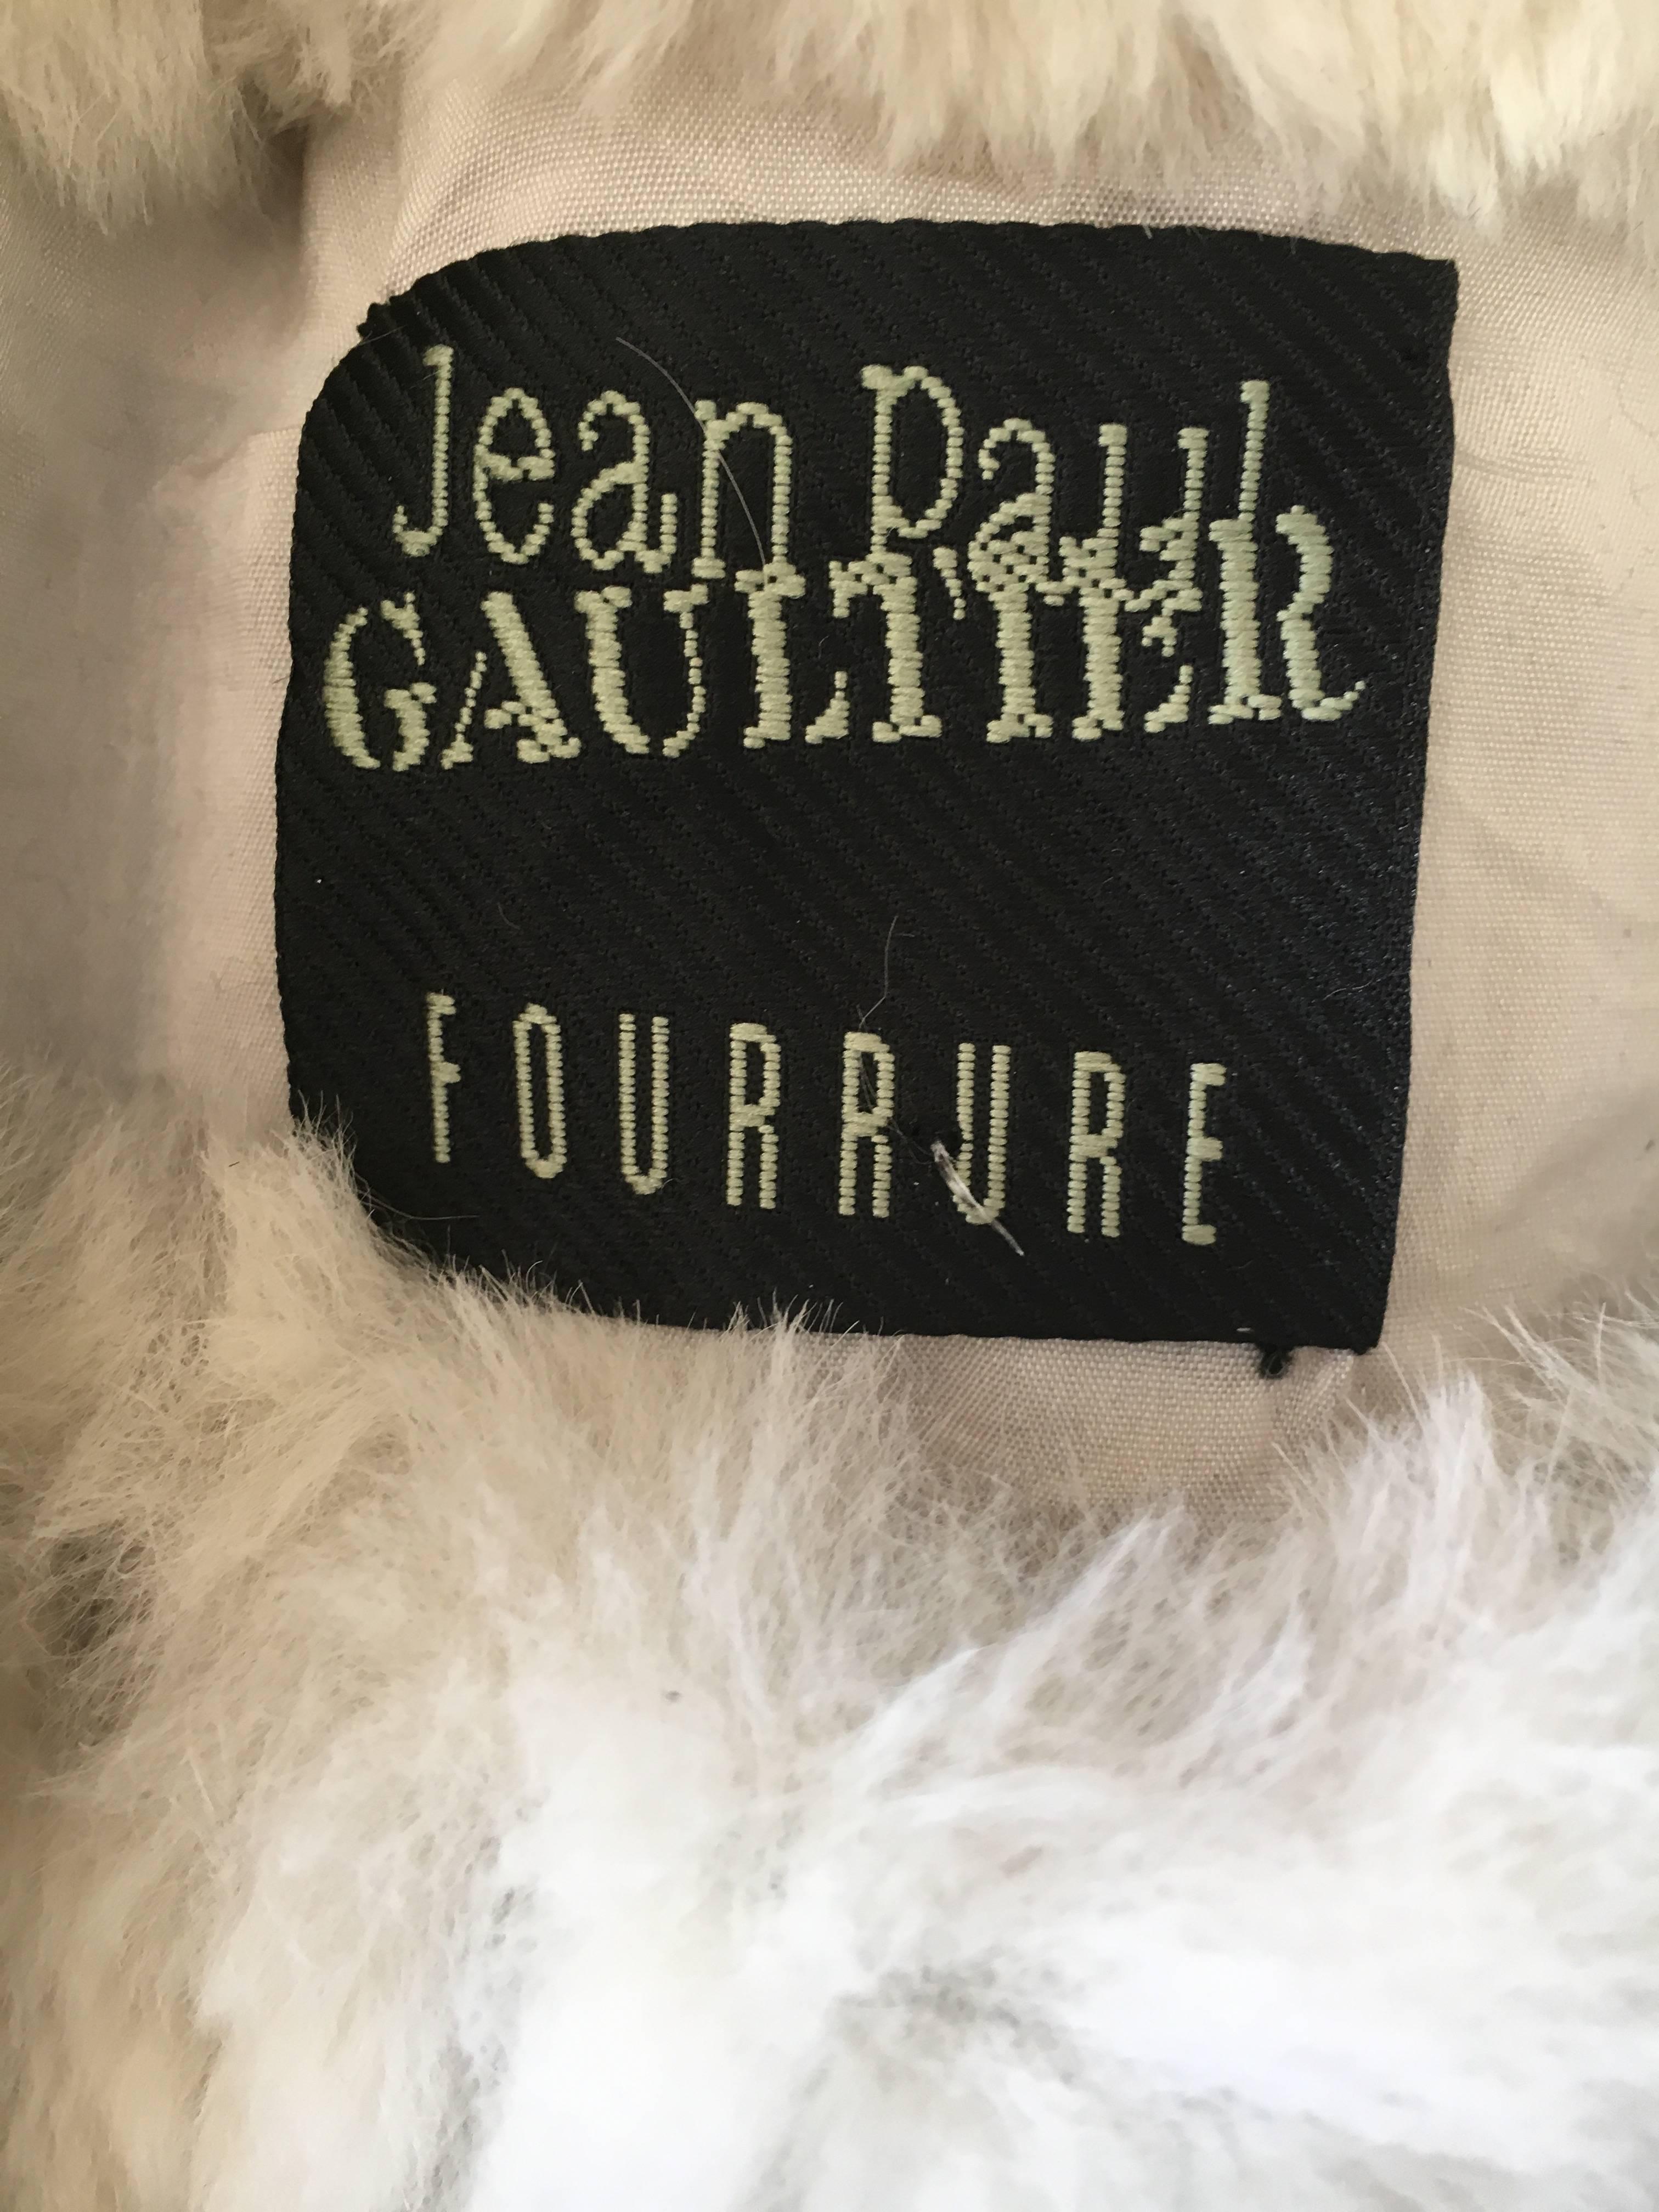 Rare Jean Paul Gaultier Fourrure nautical stripe fur sailor top.
This was featured in the opening vignette of the Jean Paul Gaultier Retrospective which toured museums word wide. It was featured on a male mannequin, and is unisex.
There is not a fur